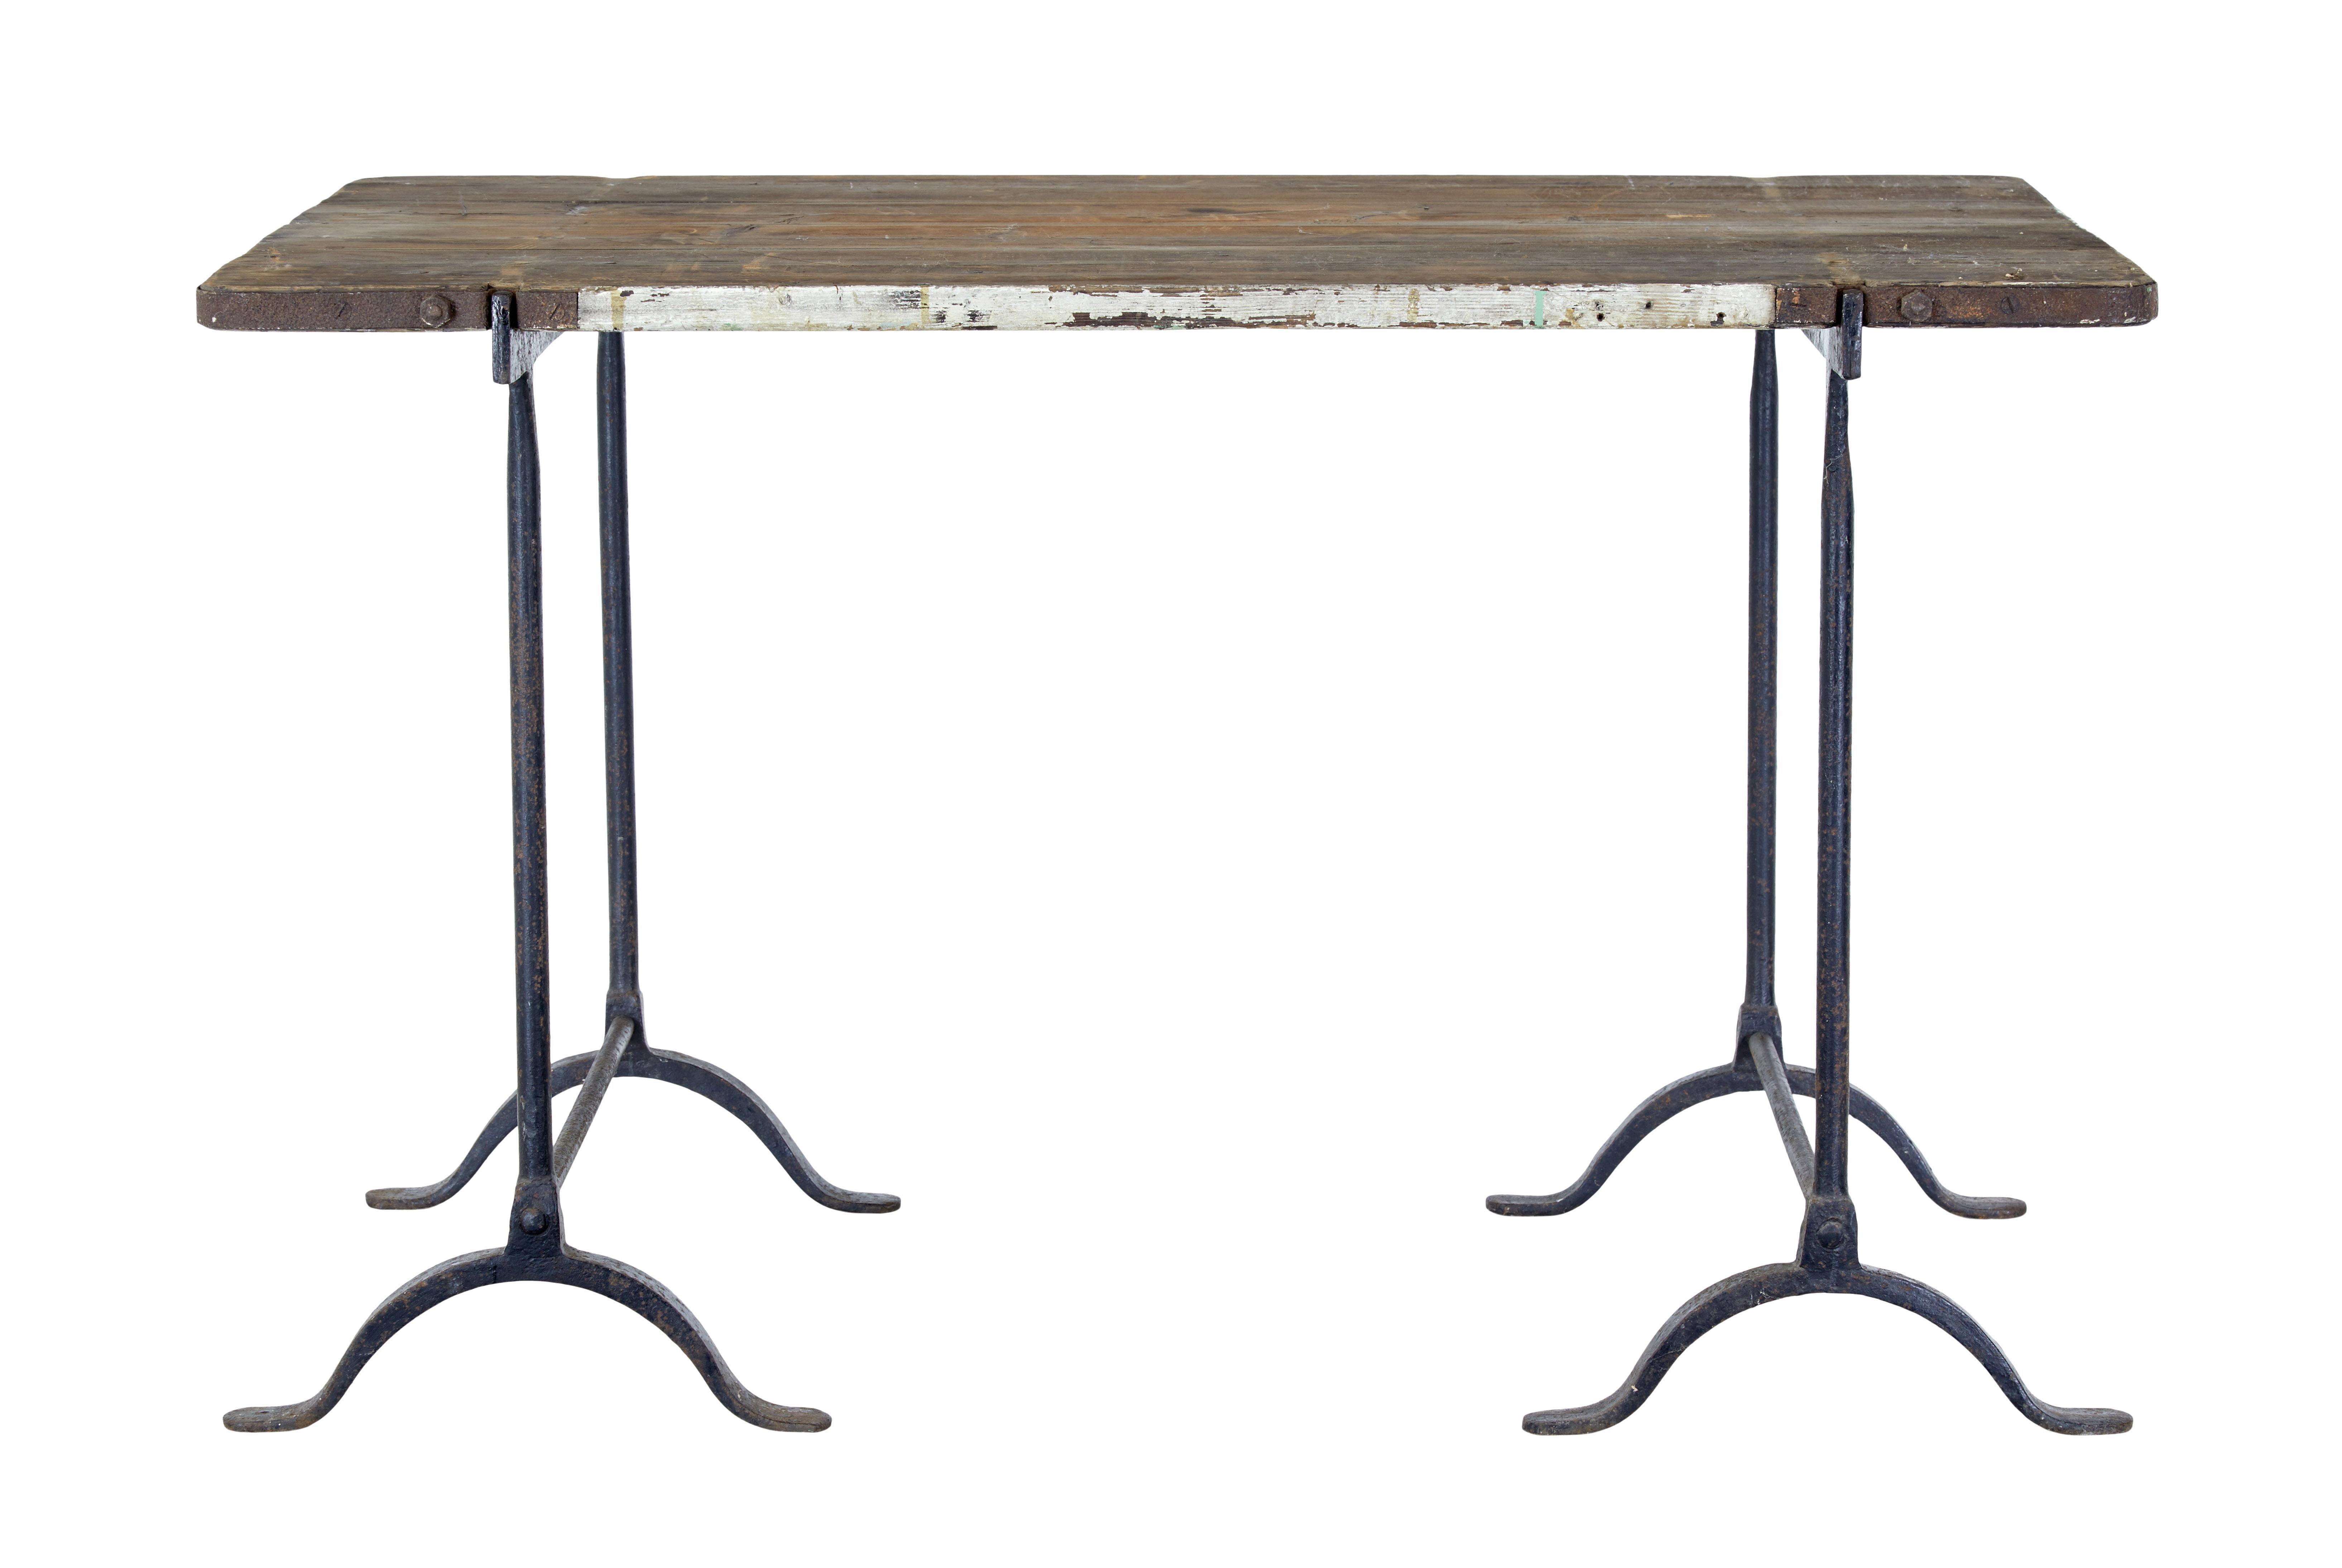 Early 20th century pine and iron trestle work table circa 1900.

Good quality trestle work table, which is more rare than the normal as the top has always been with the bases, as the top has specially spaced fittings for the cast iron